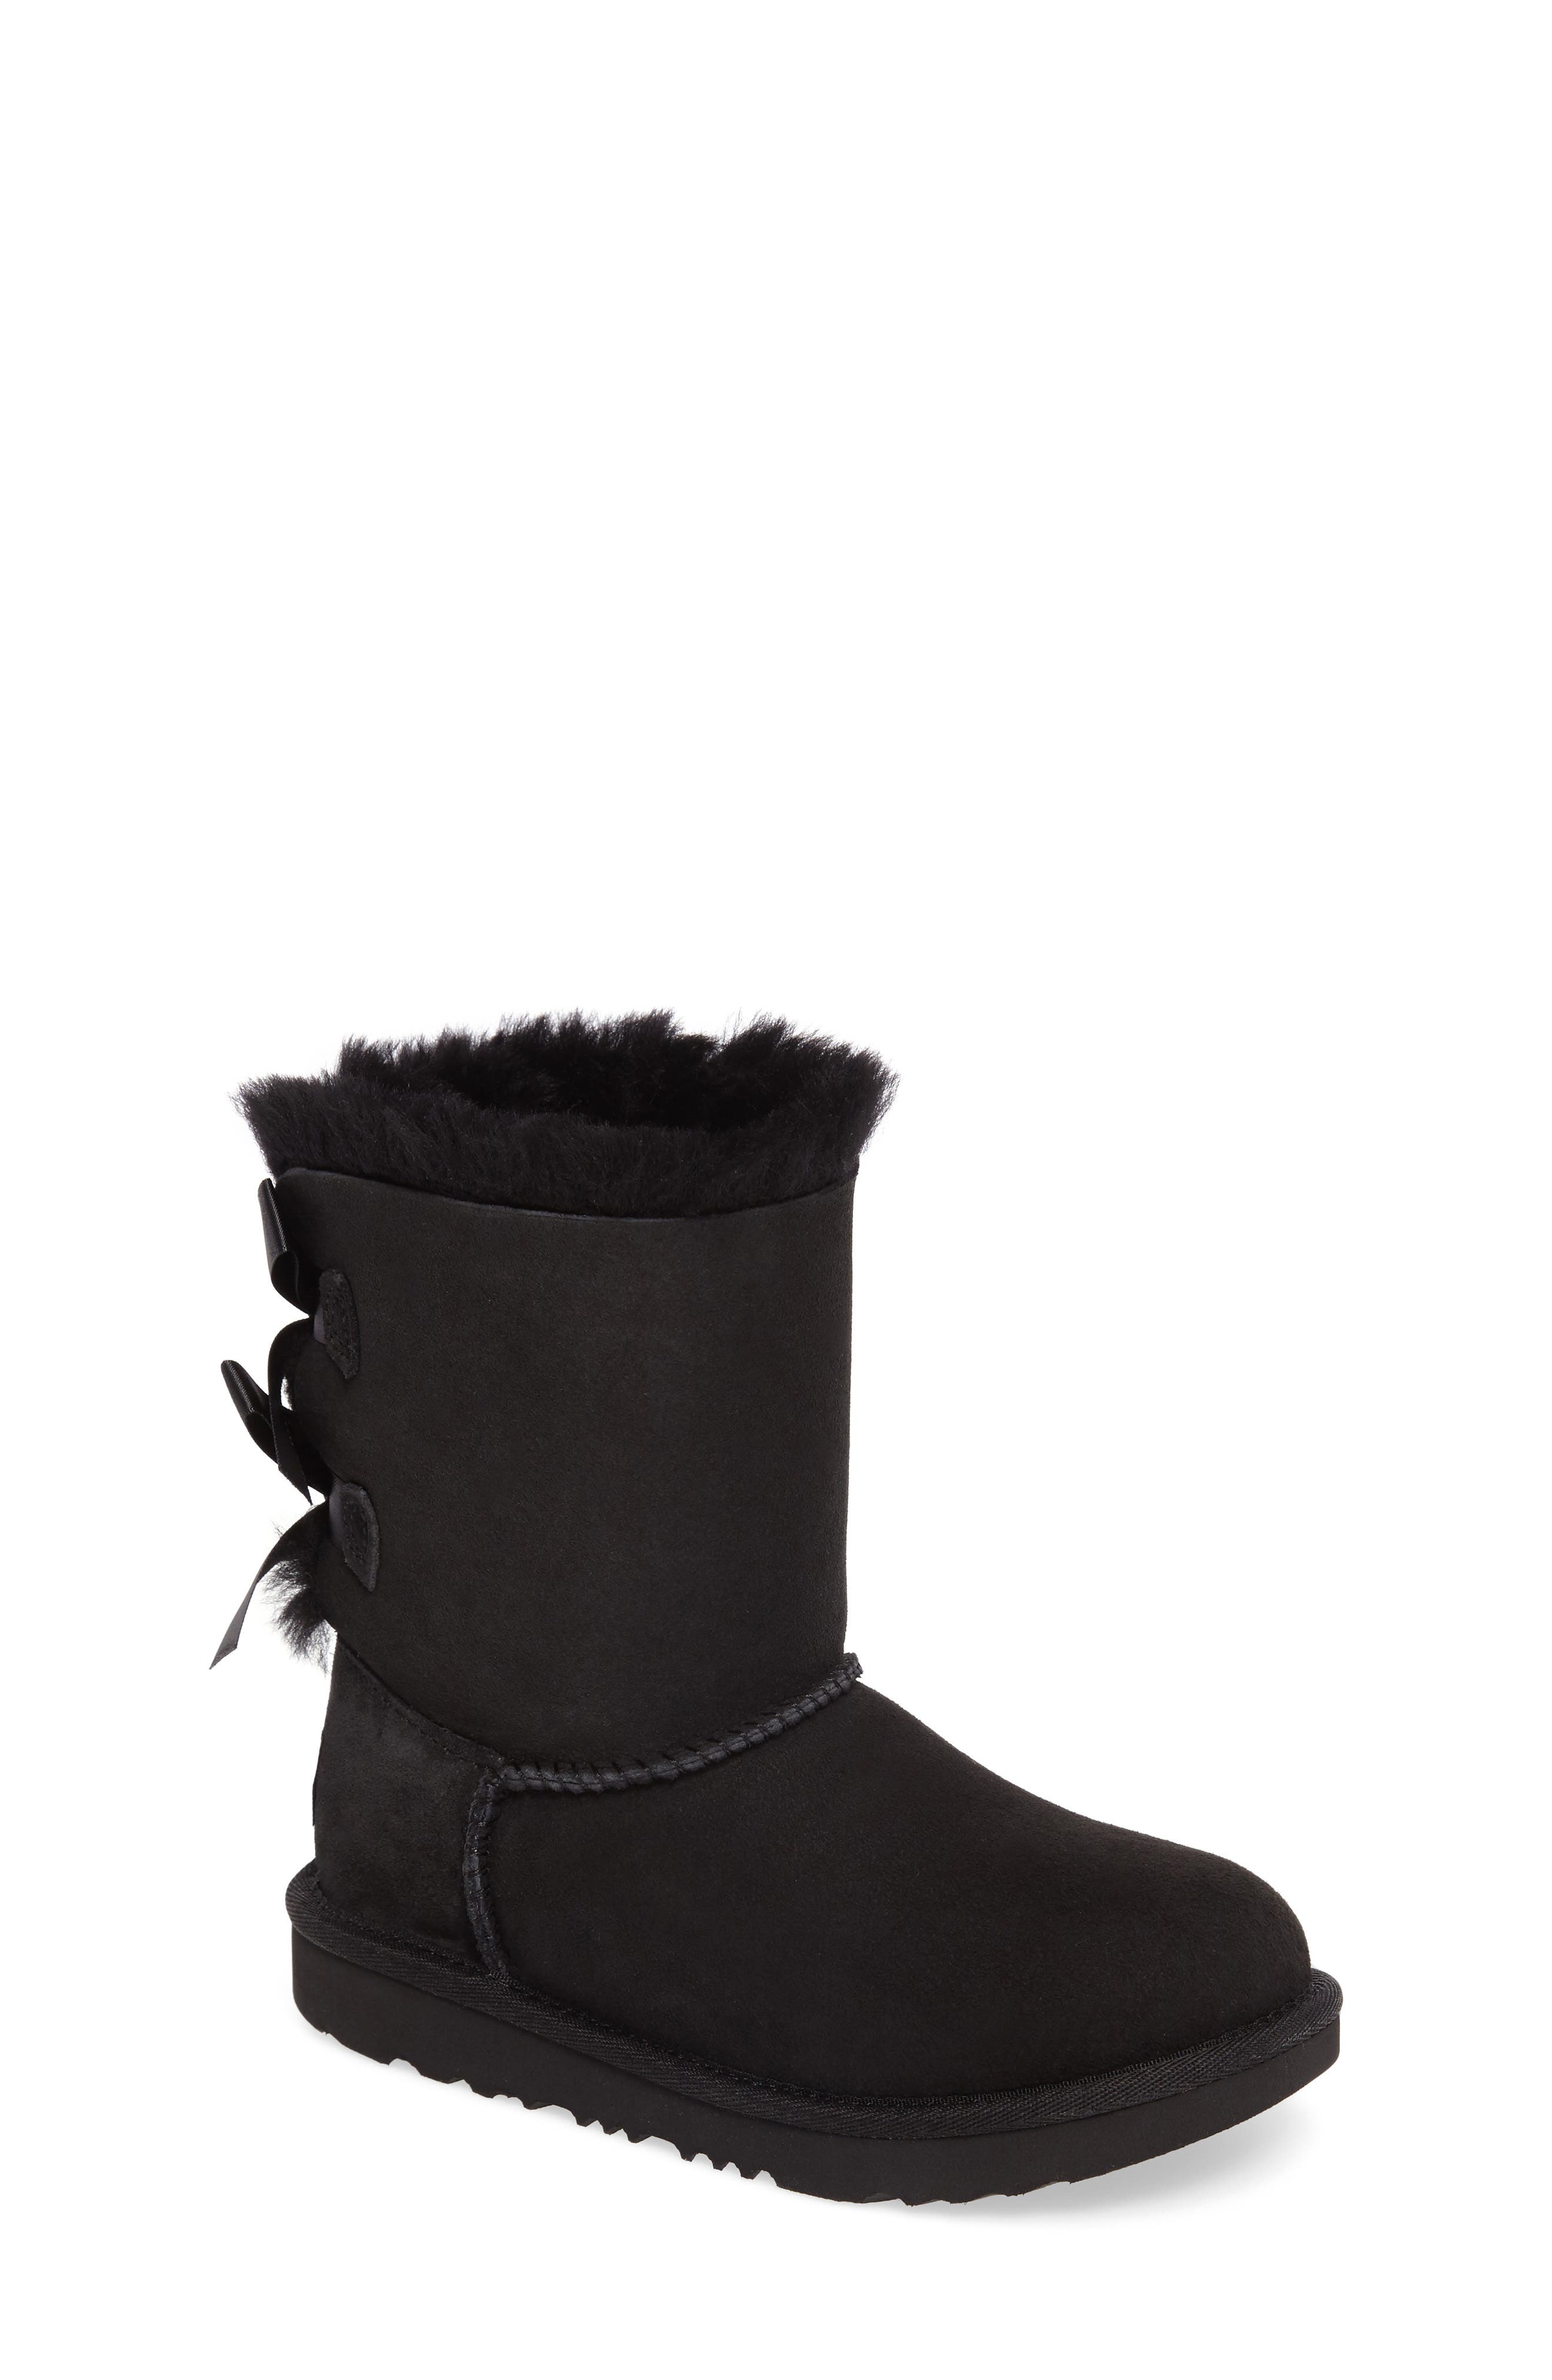 black fur boots for toddlers